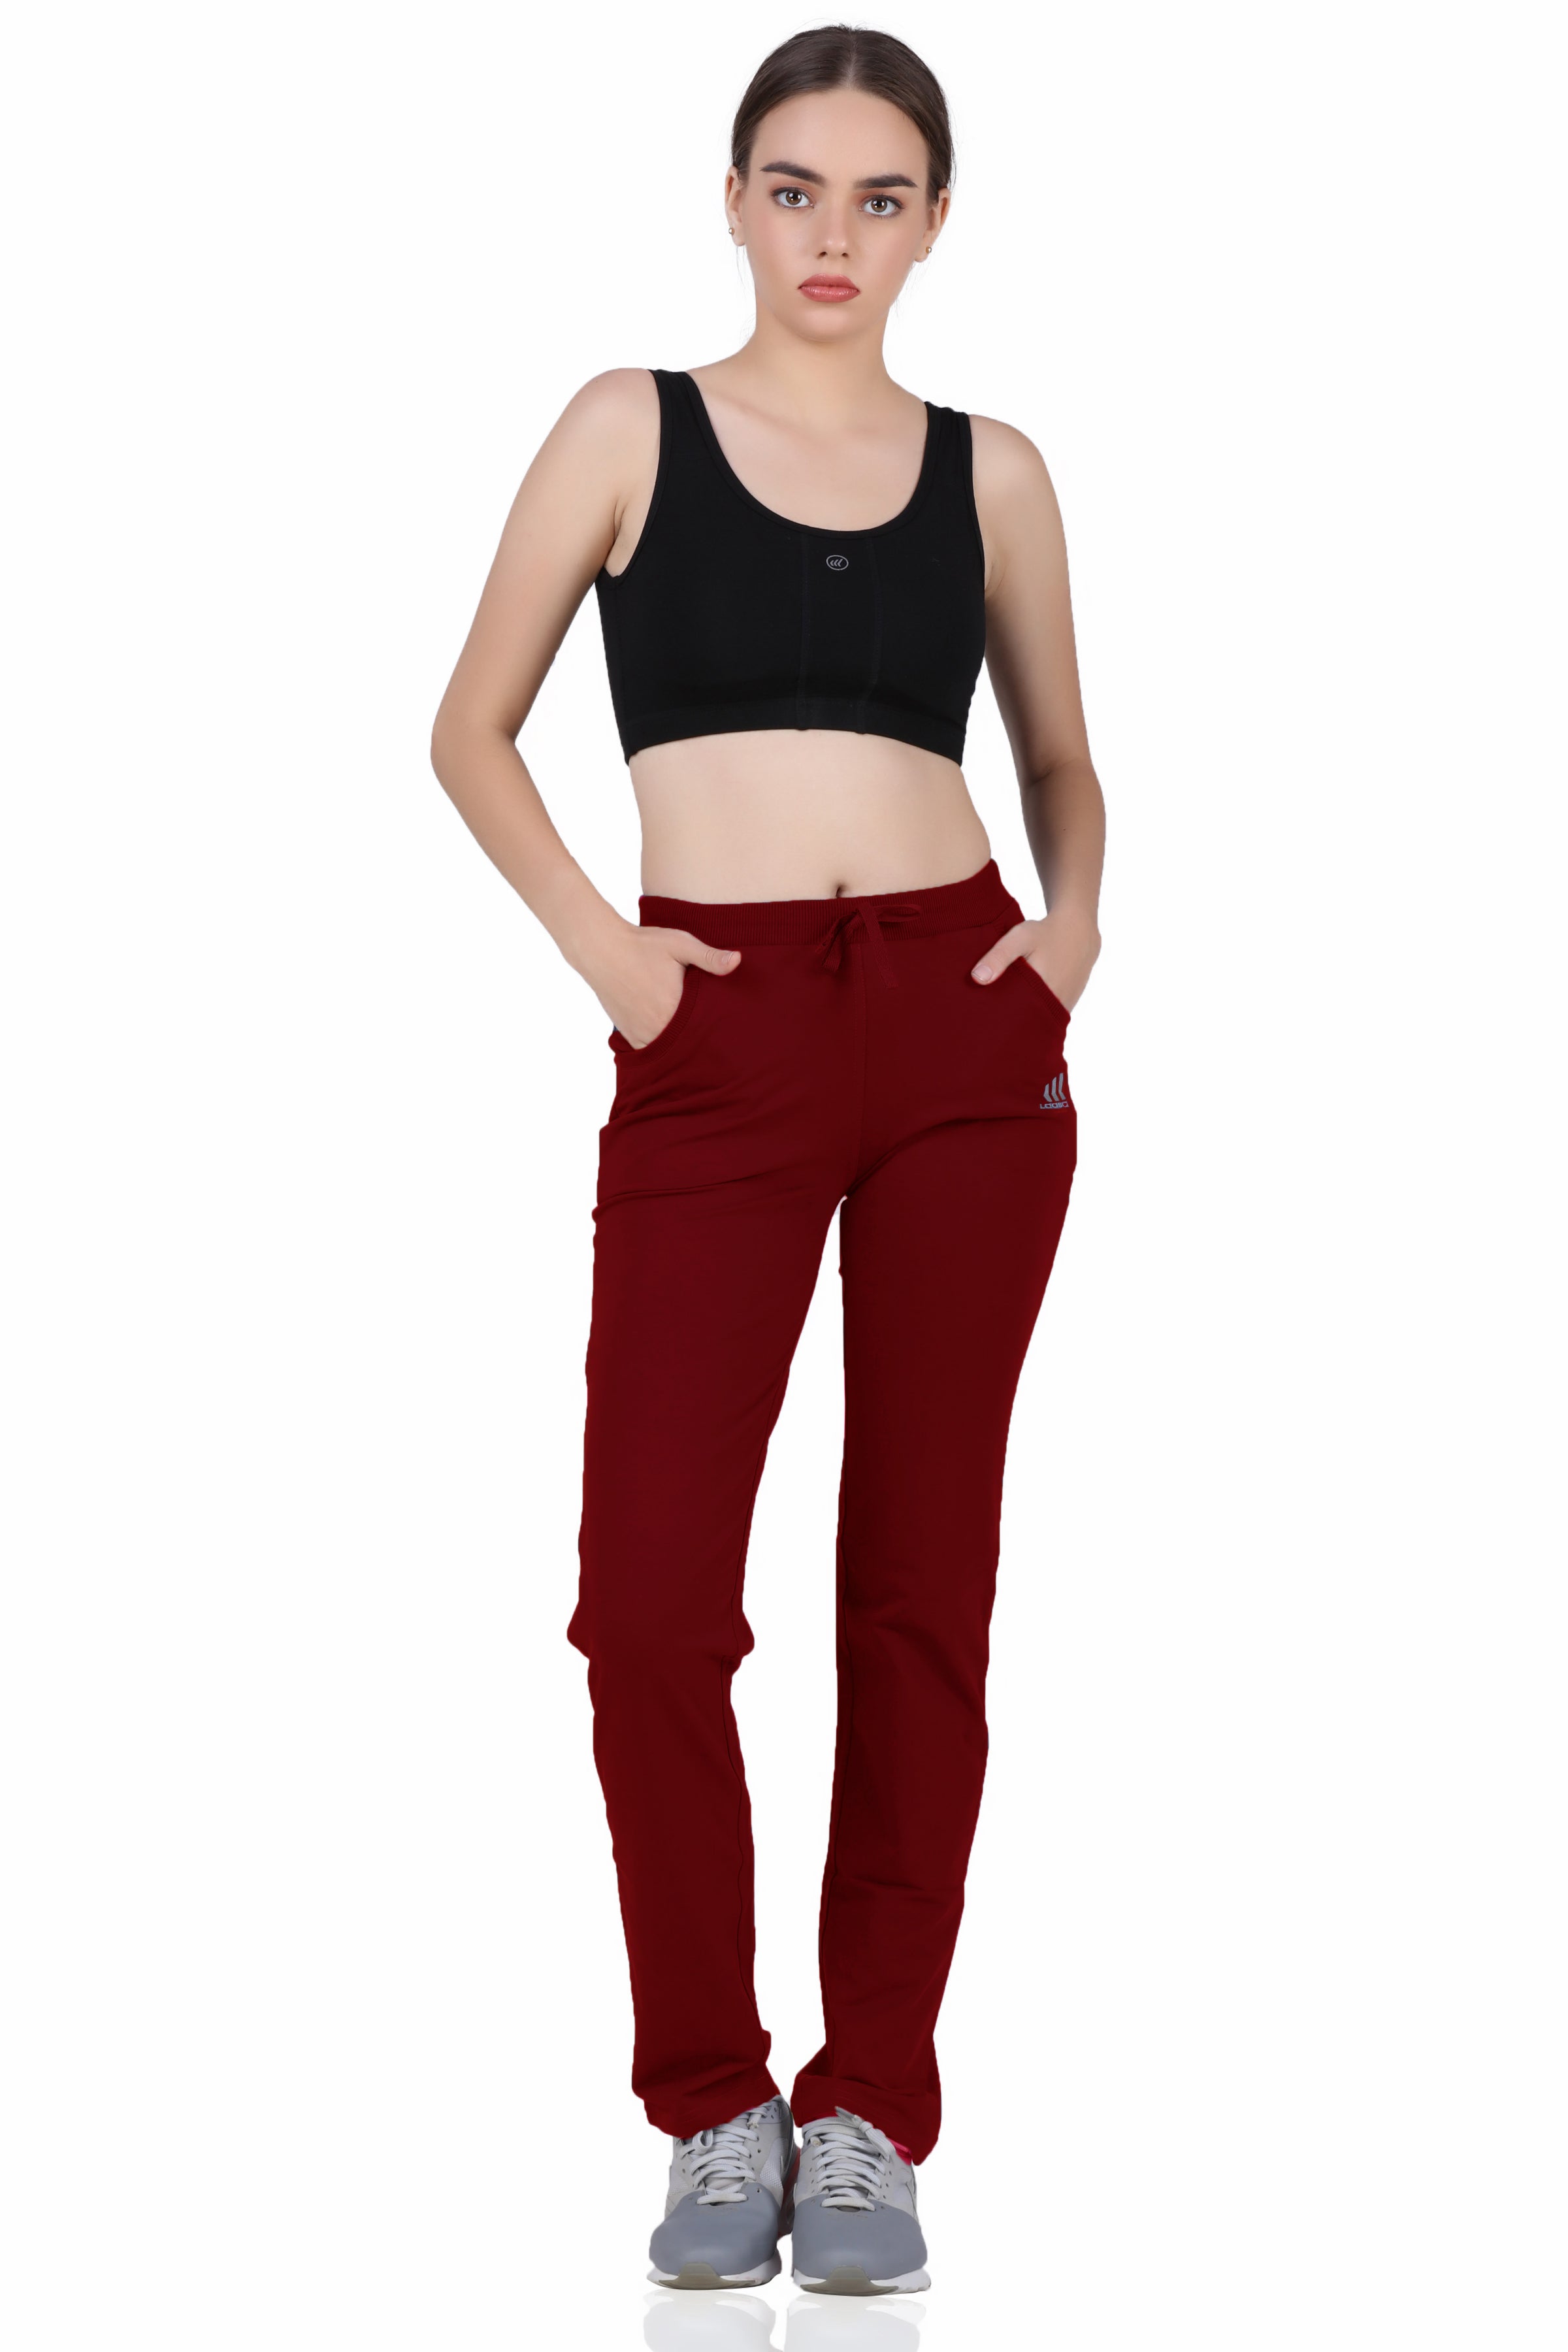 DG Divine Girl Women Regular Fit Cotton Blend Plain Comfortable Night Track  Pant, Lower, Sports Trouser, Joggers, Lounge Wear and Daily Gym Wear for  Ladies (M, Black) : Amazon.in: Clothing & Accessories